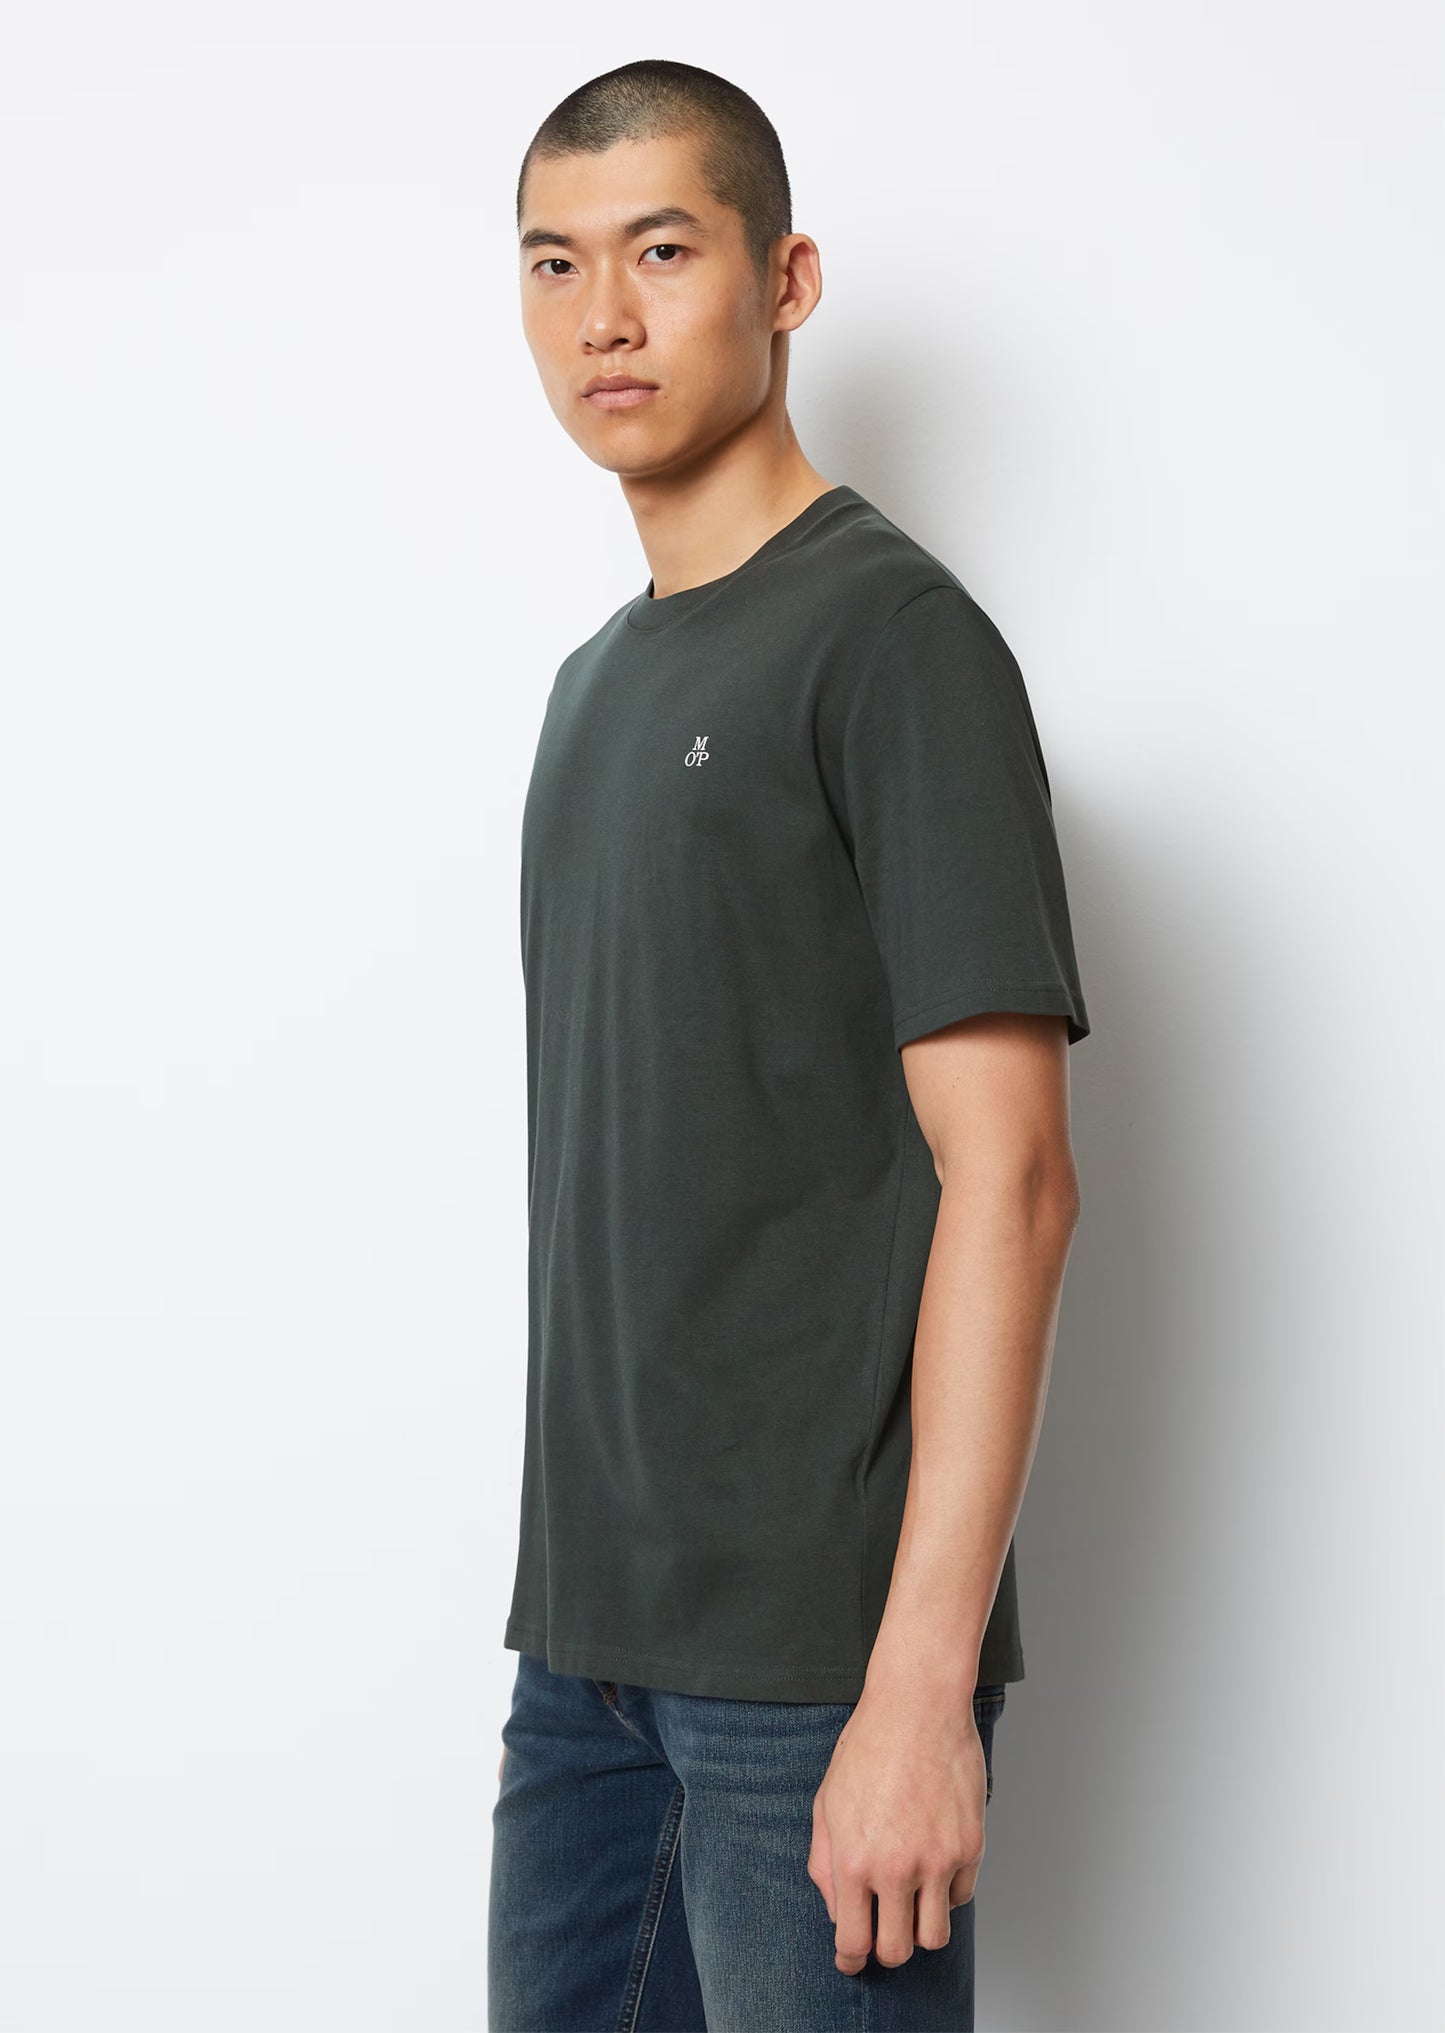 Marc O'Polo Charcoal Round Neck T-Shirt